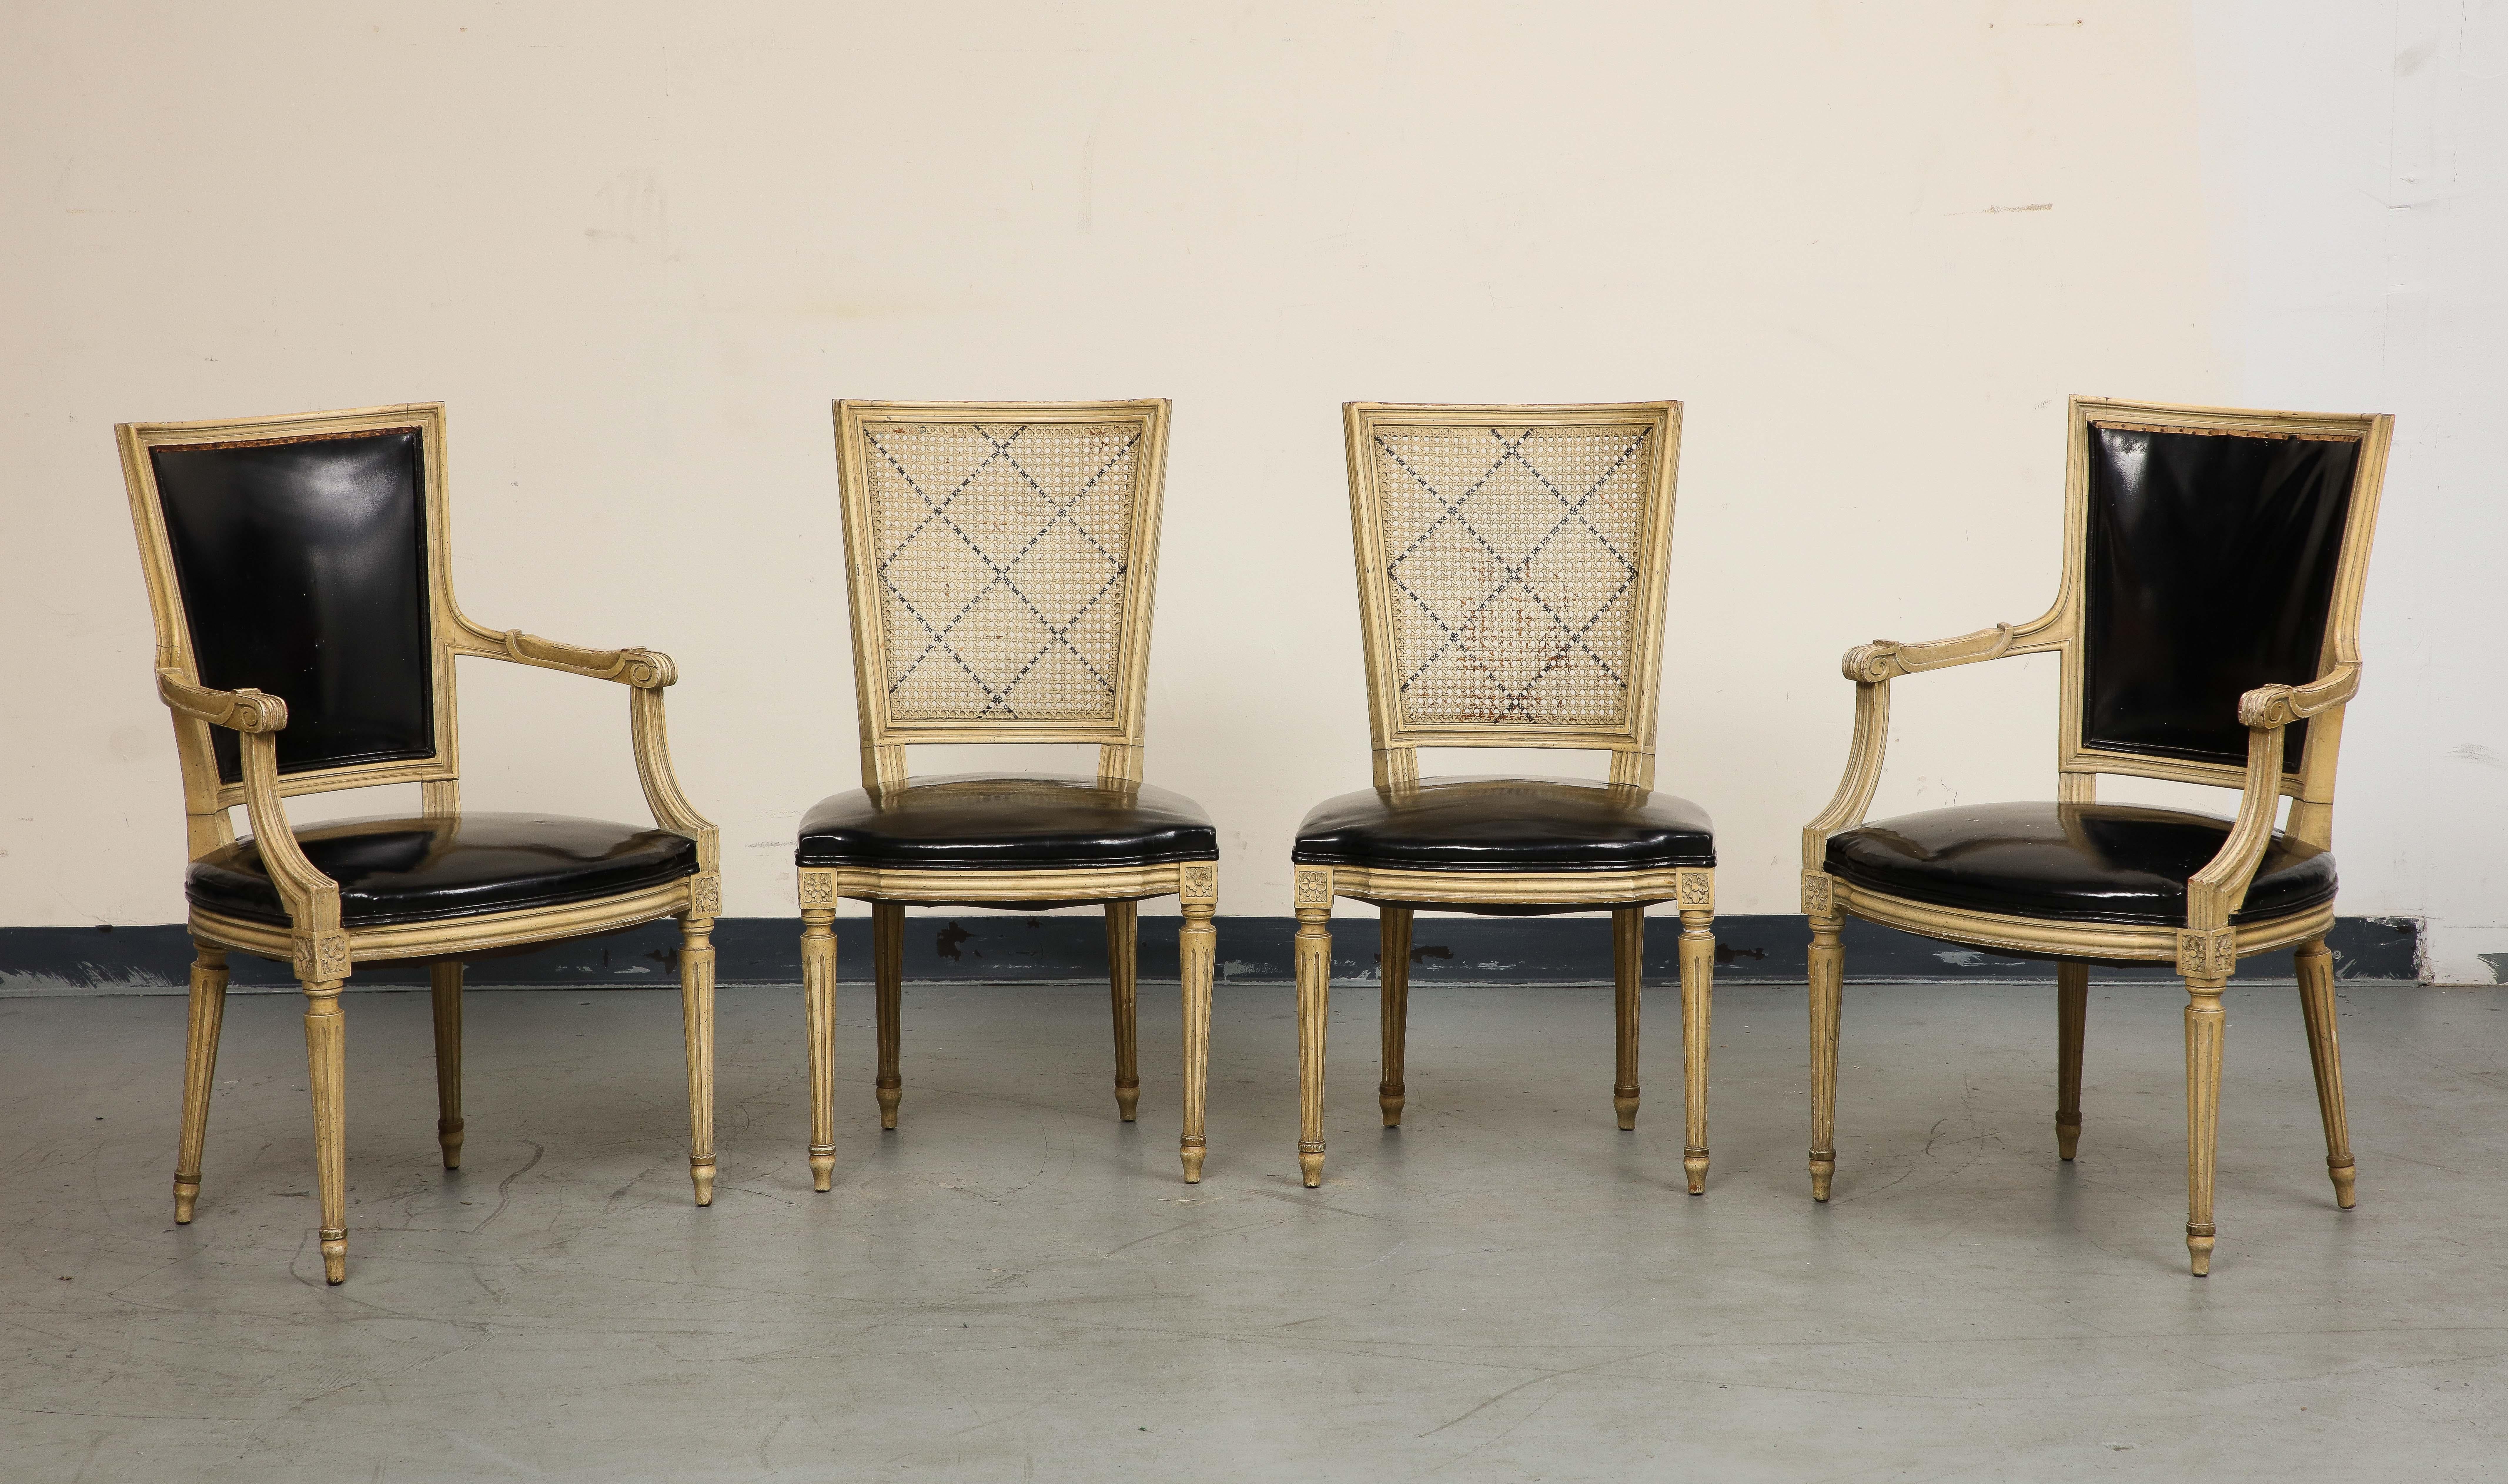 A lovely set of four (4) midcentury French chairs, circa 1940, in the Louis XVI style. One pair of armchairs with faux black leather seats and backs is partnered with a pair of side chairs with elegant cane backs. 

Armchair Dimensions: 37